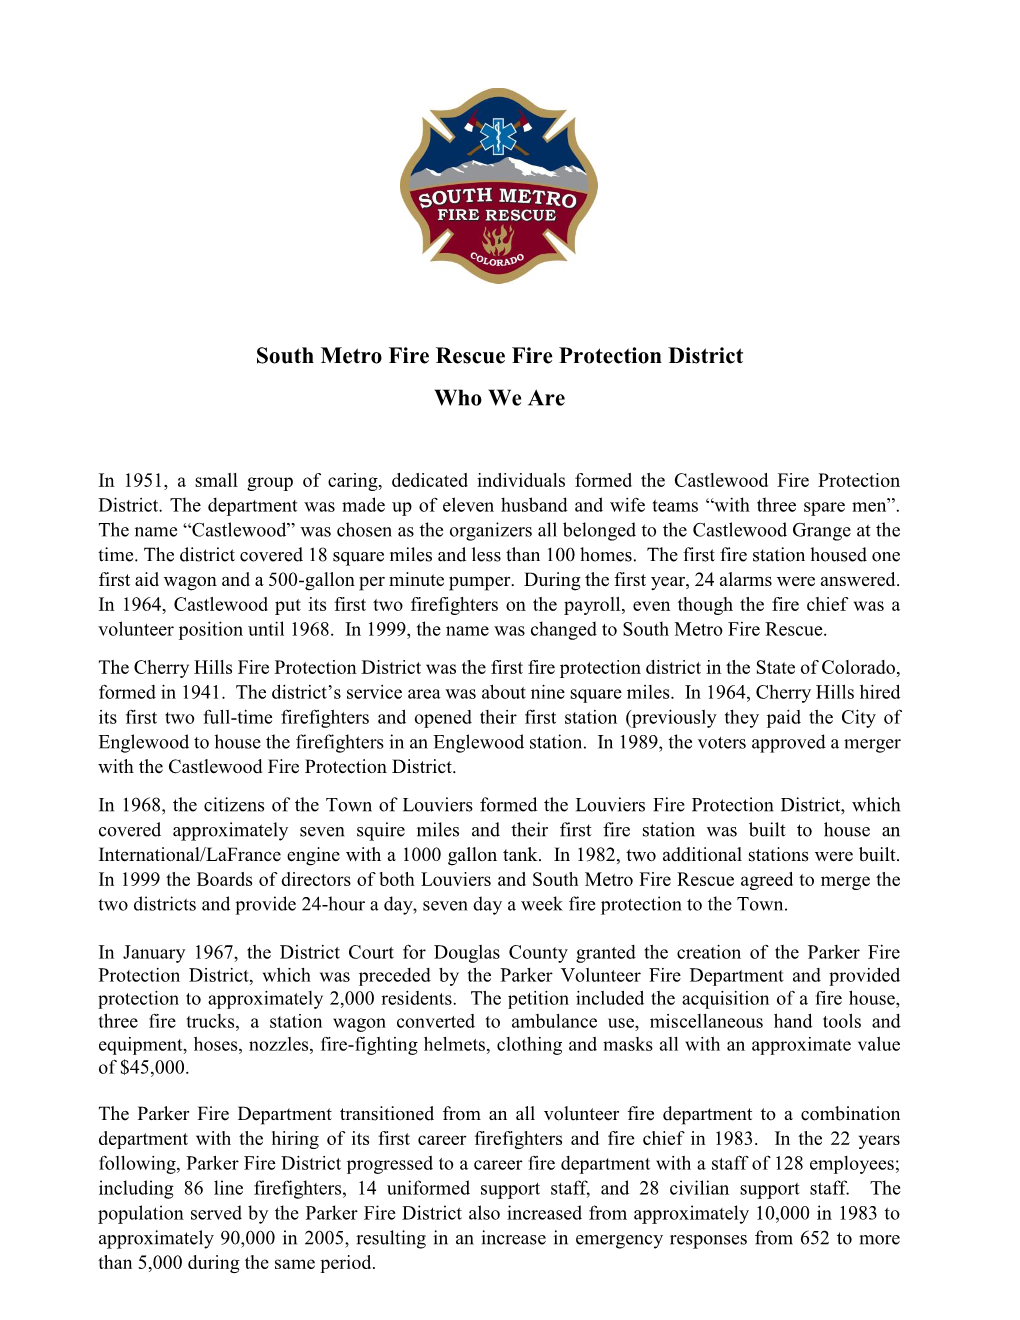 South Metro Fire Rescue Fire Protection District Who We Are